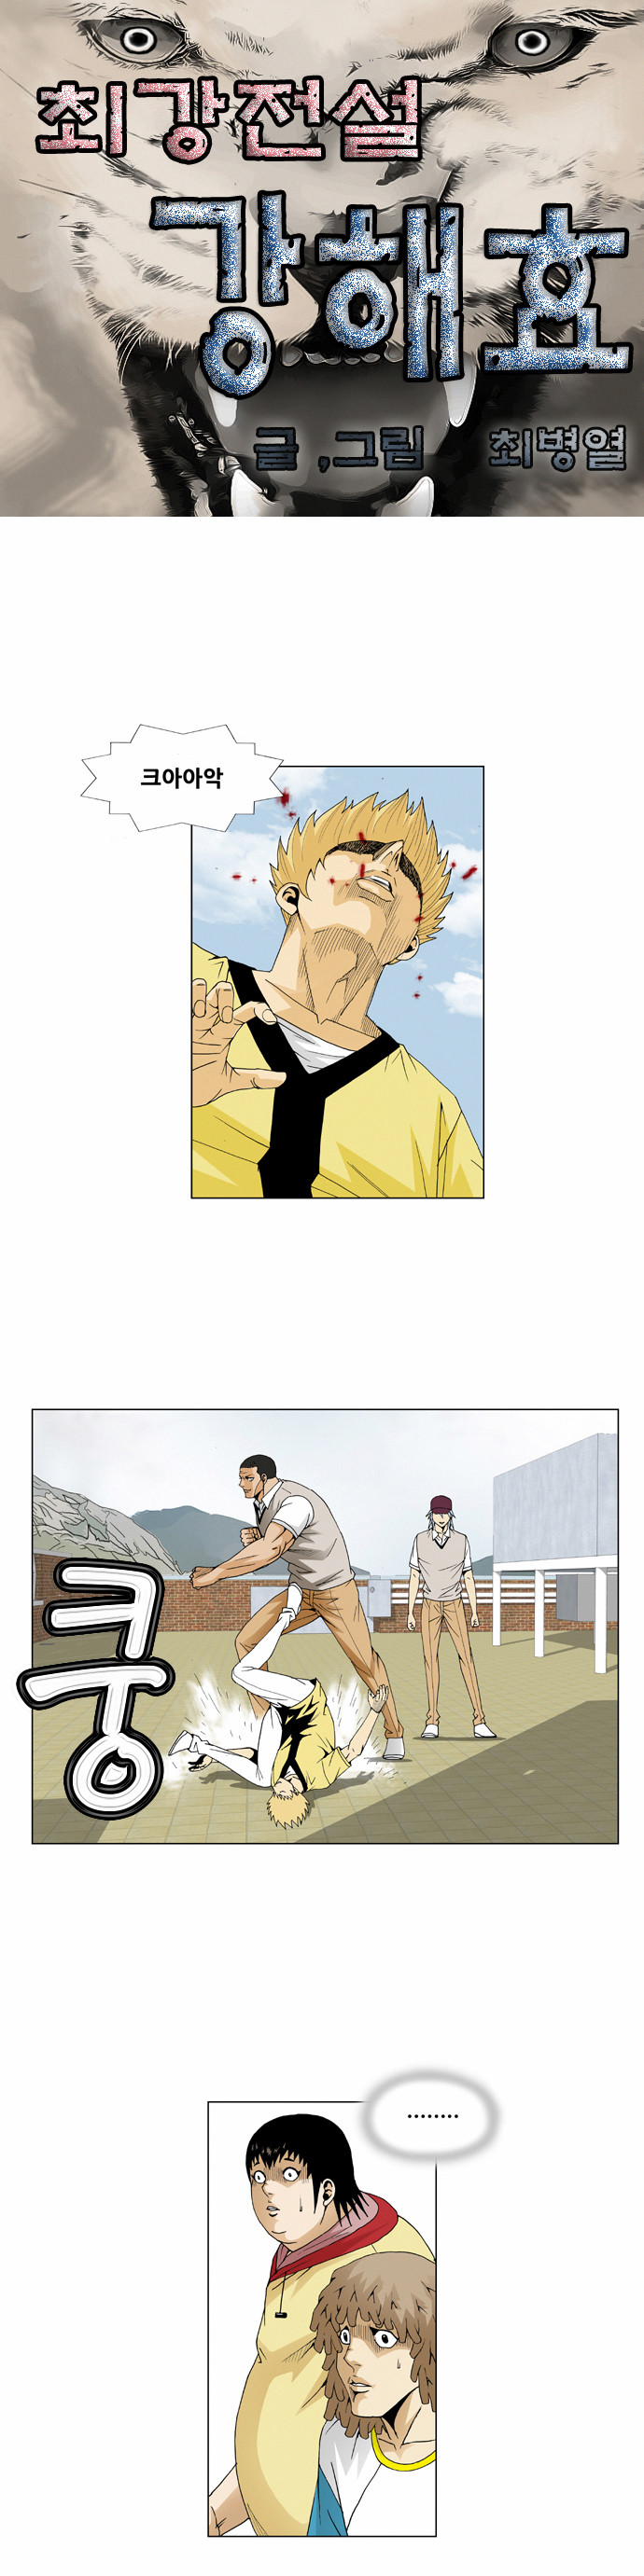 Ultimate Legend - Kang Hae Hyo - Chapter 64 - Page 2